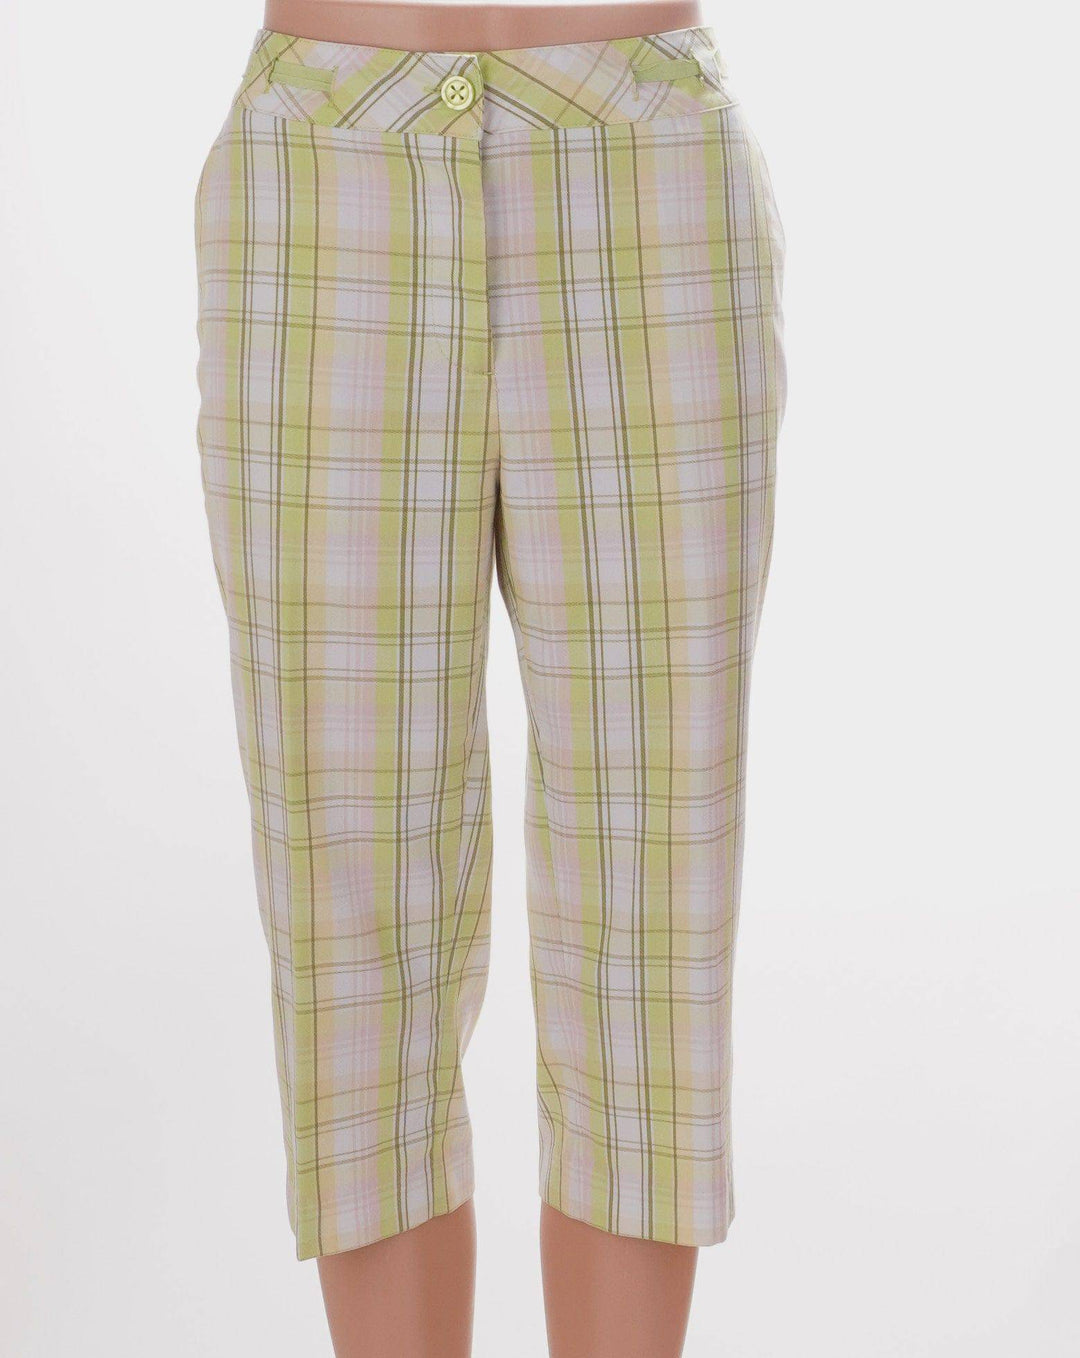 EP Pro Lime Green / 4 / Consigned EP Pro - Lime Green Plaid - Size 4